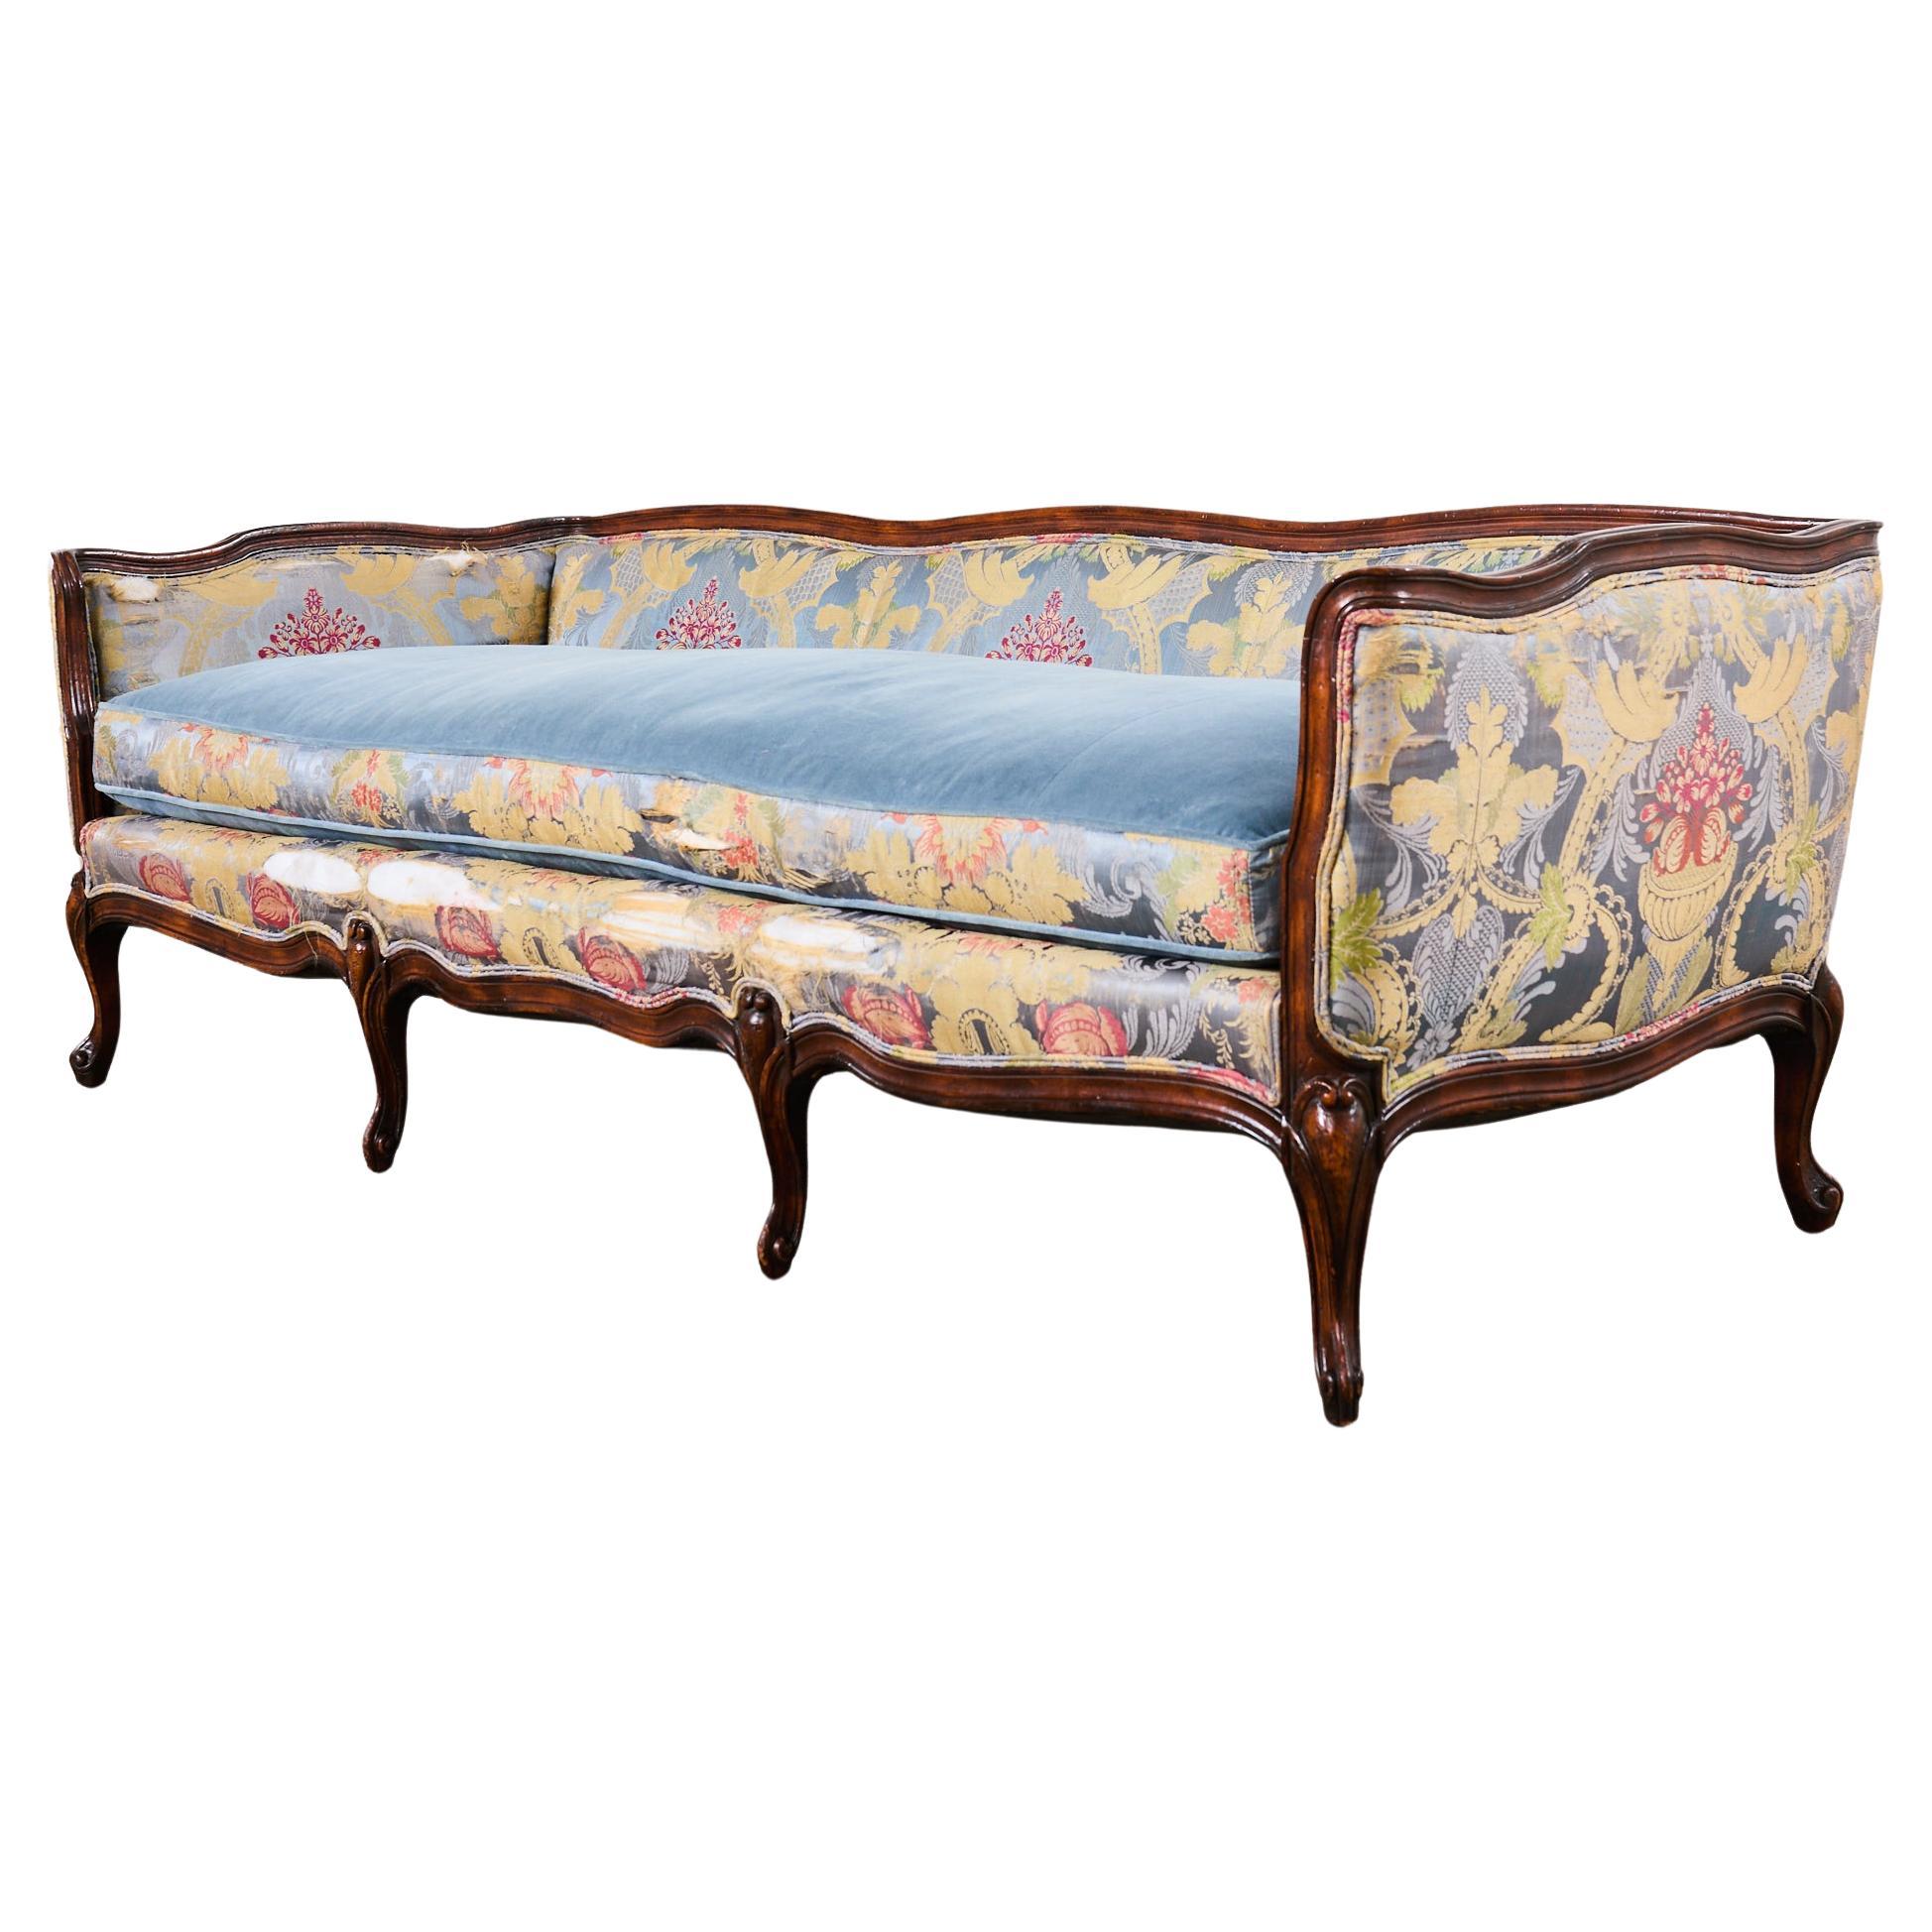 French Provincial Louis XV Style Serpentine Canape Sofa Settee For Sale